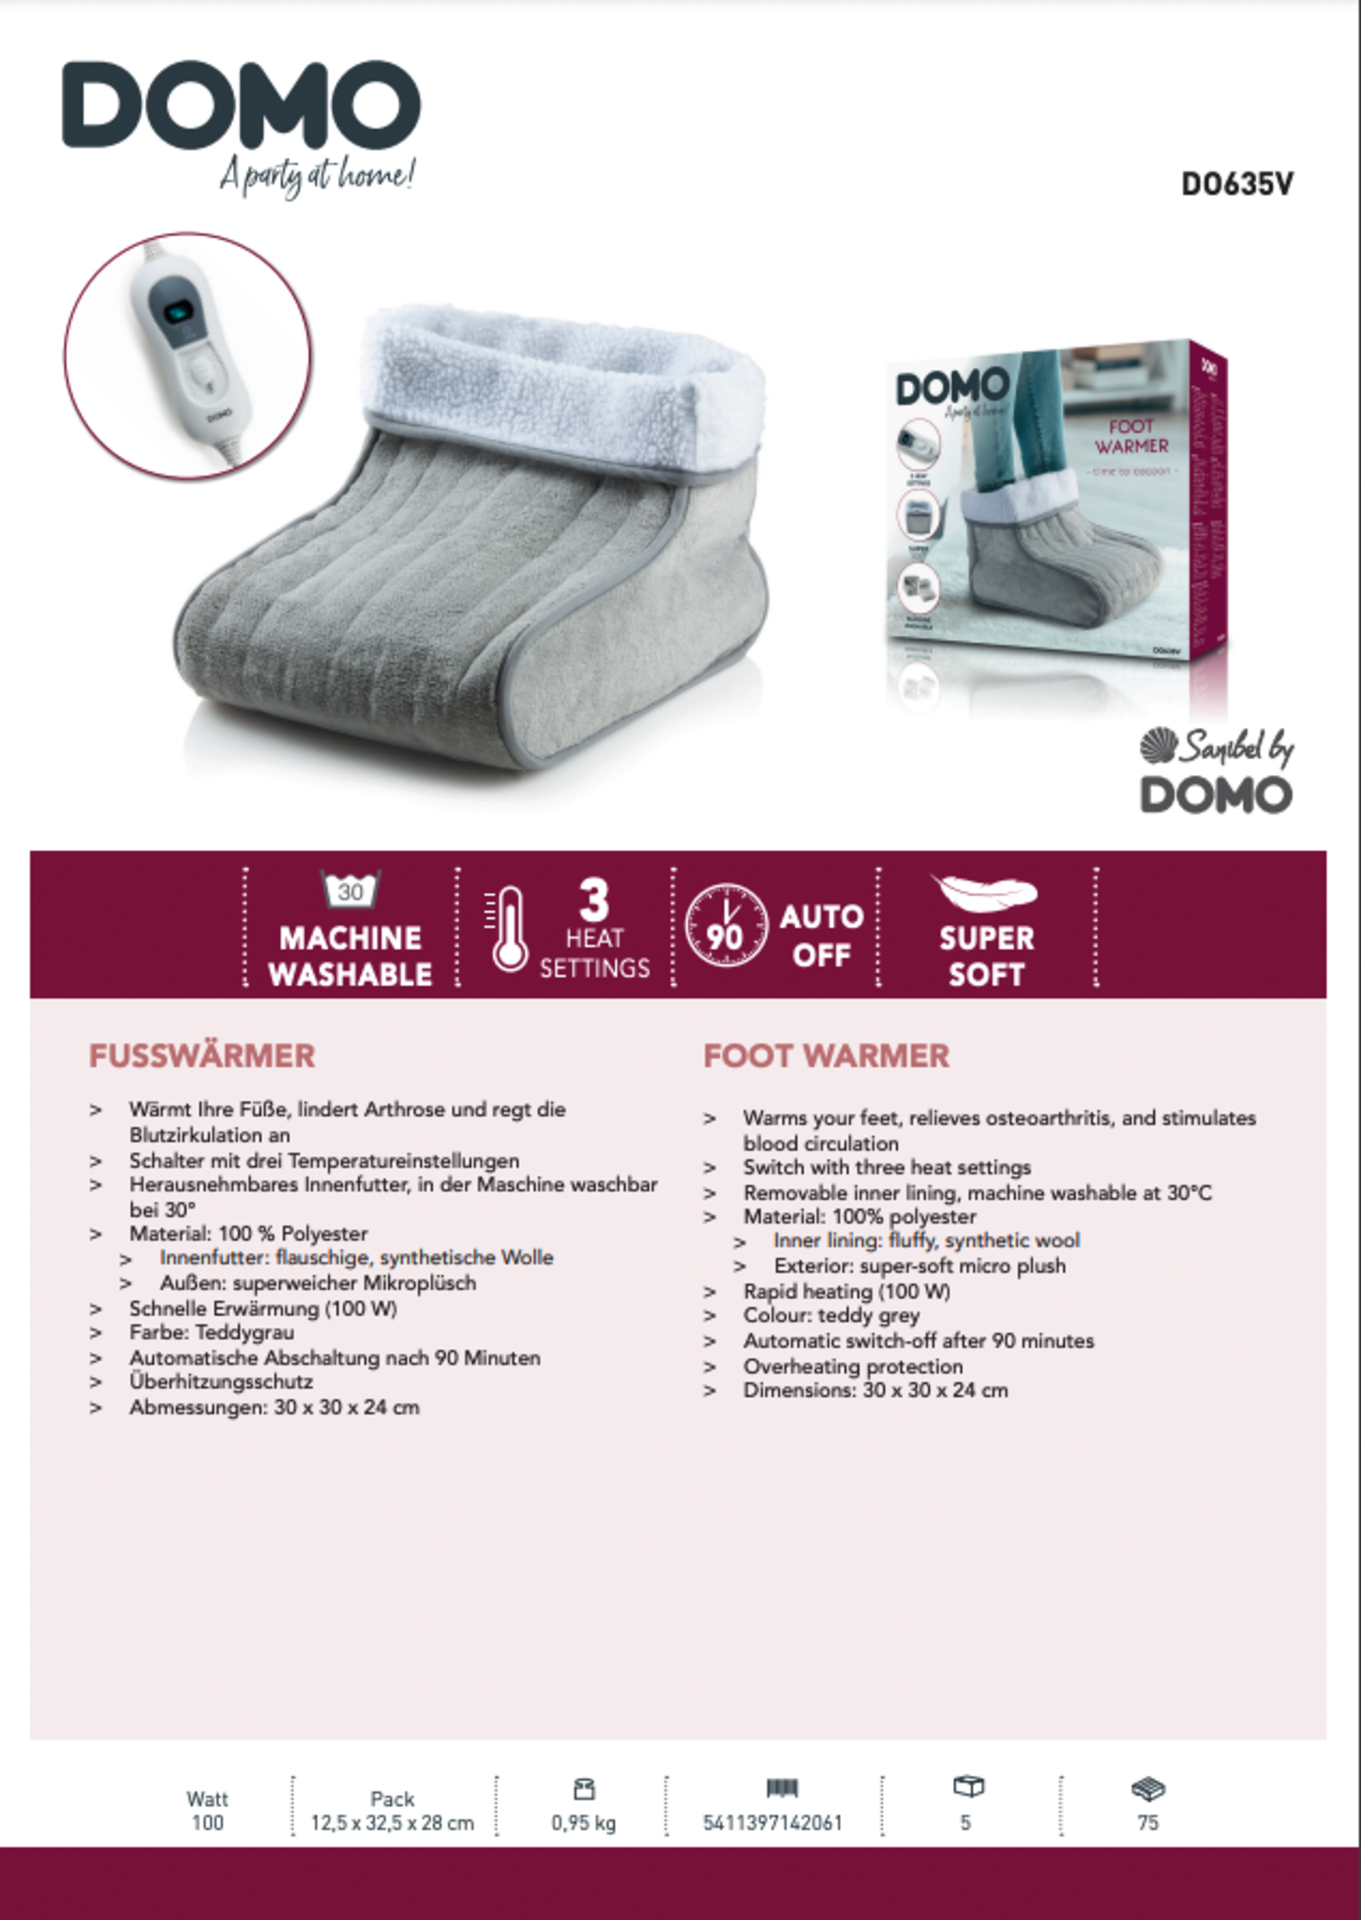 10 x DOMO Twin Super Soft Foot Warmers RRP £ 50 each - Image 2 of 2